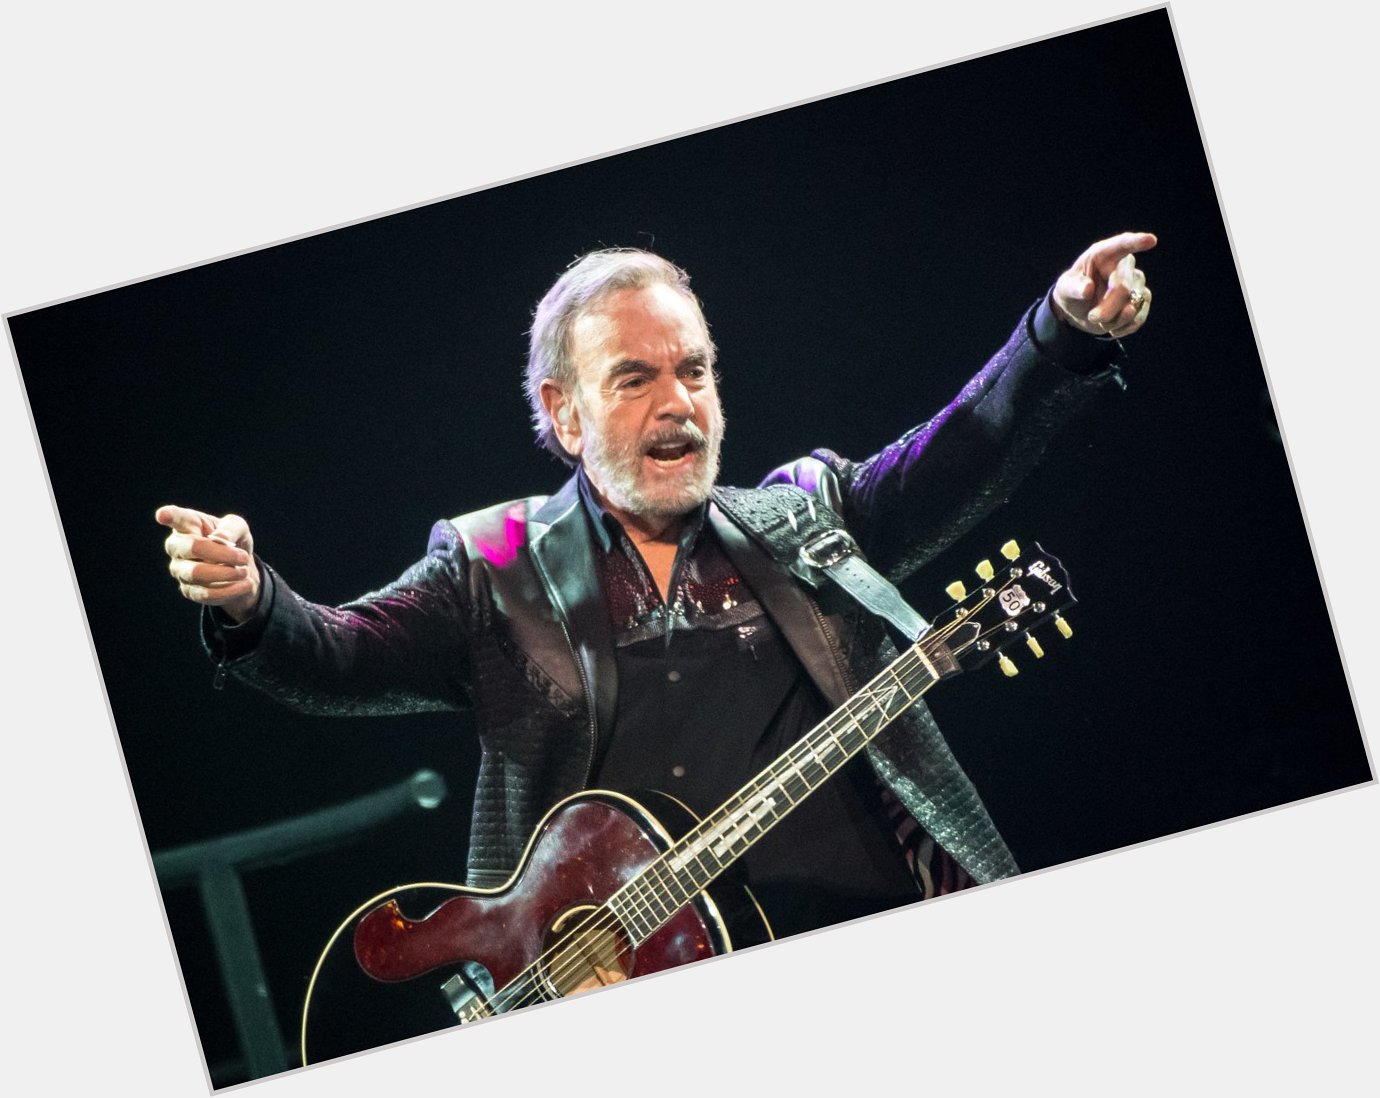 A Big BOSS Happy Birthday today to Neil Diamond from all of us at Boss Boss Radio. 